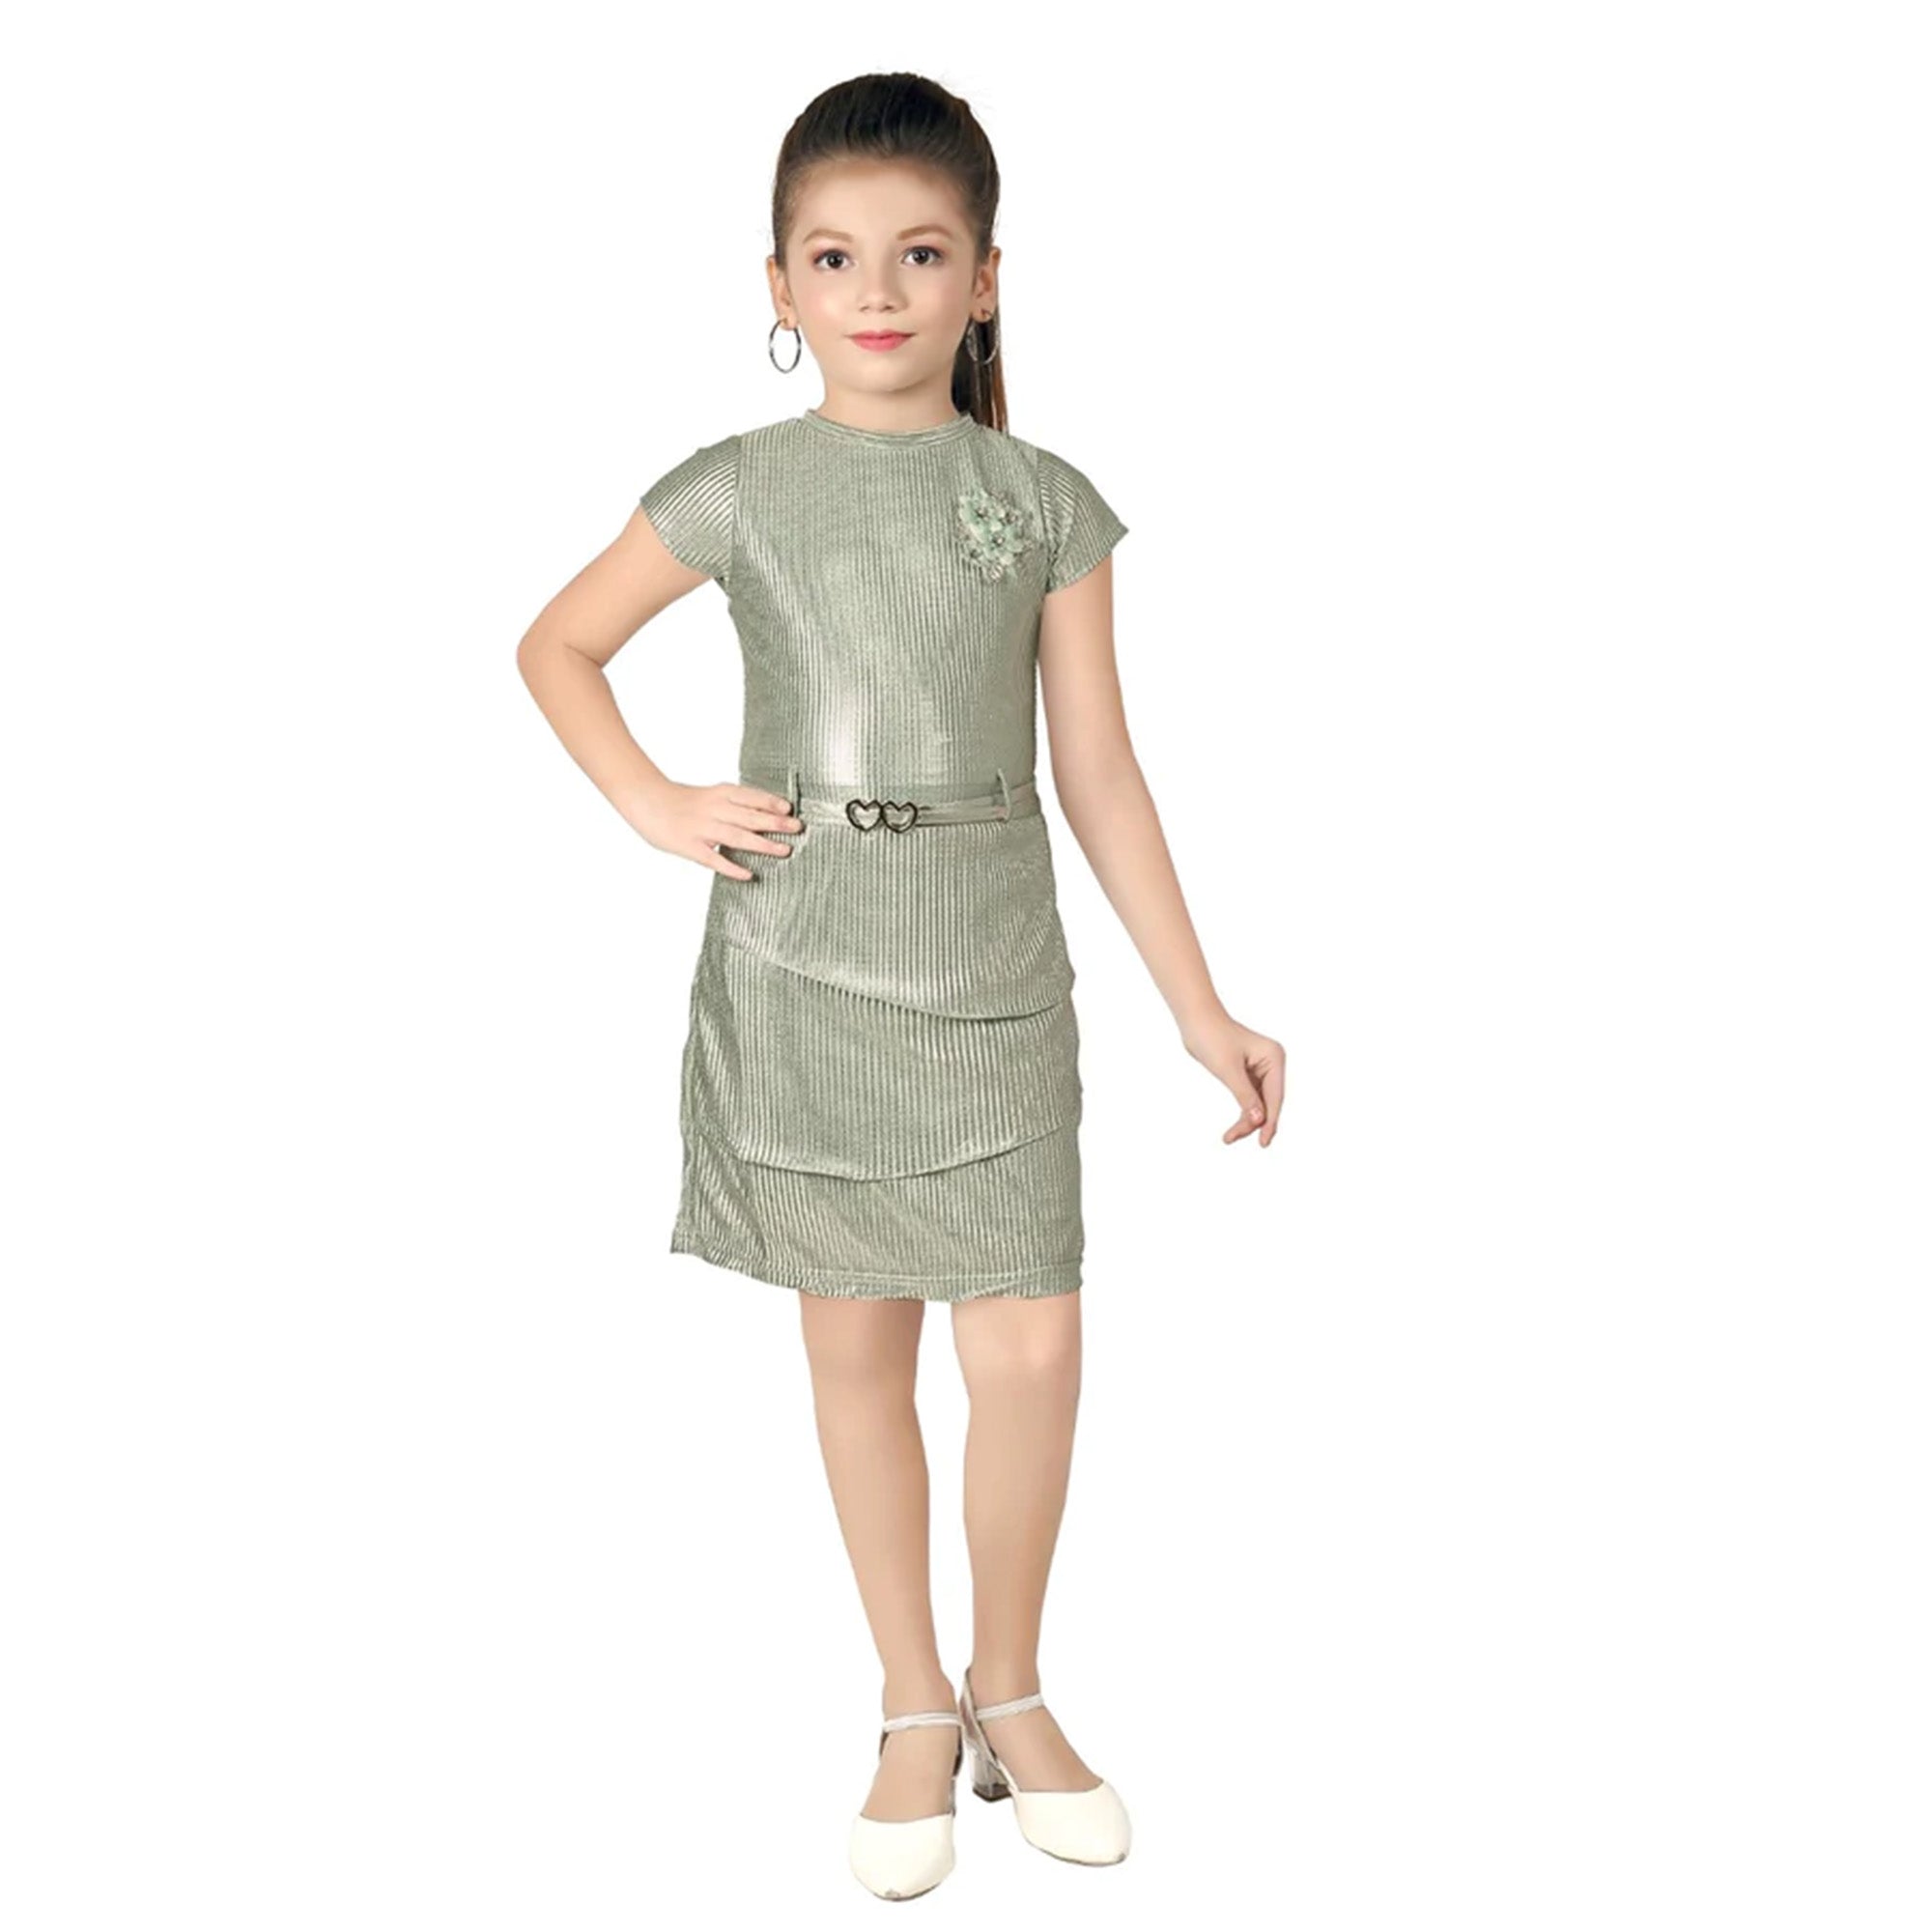 fcity.in - High Fame Party Wear Midi Dress / Tinkle Elegant Frocks Dresses